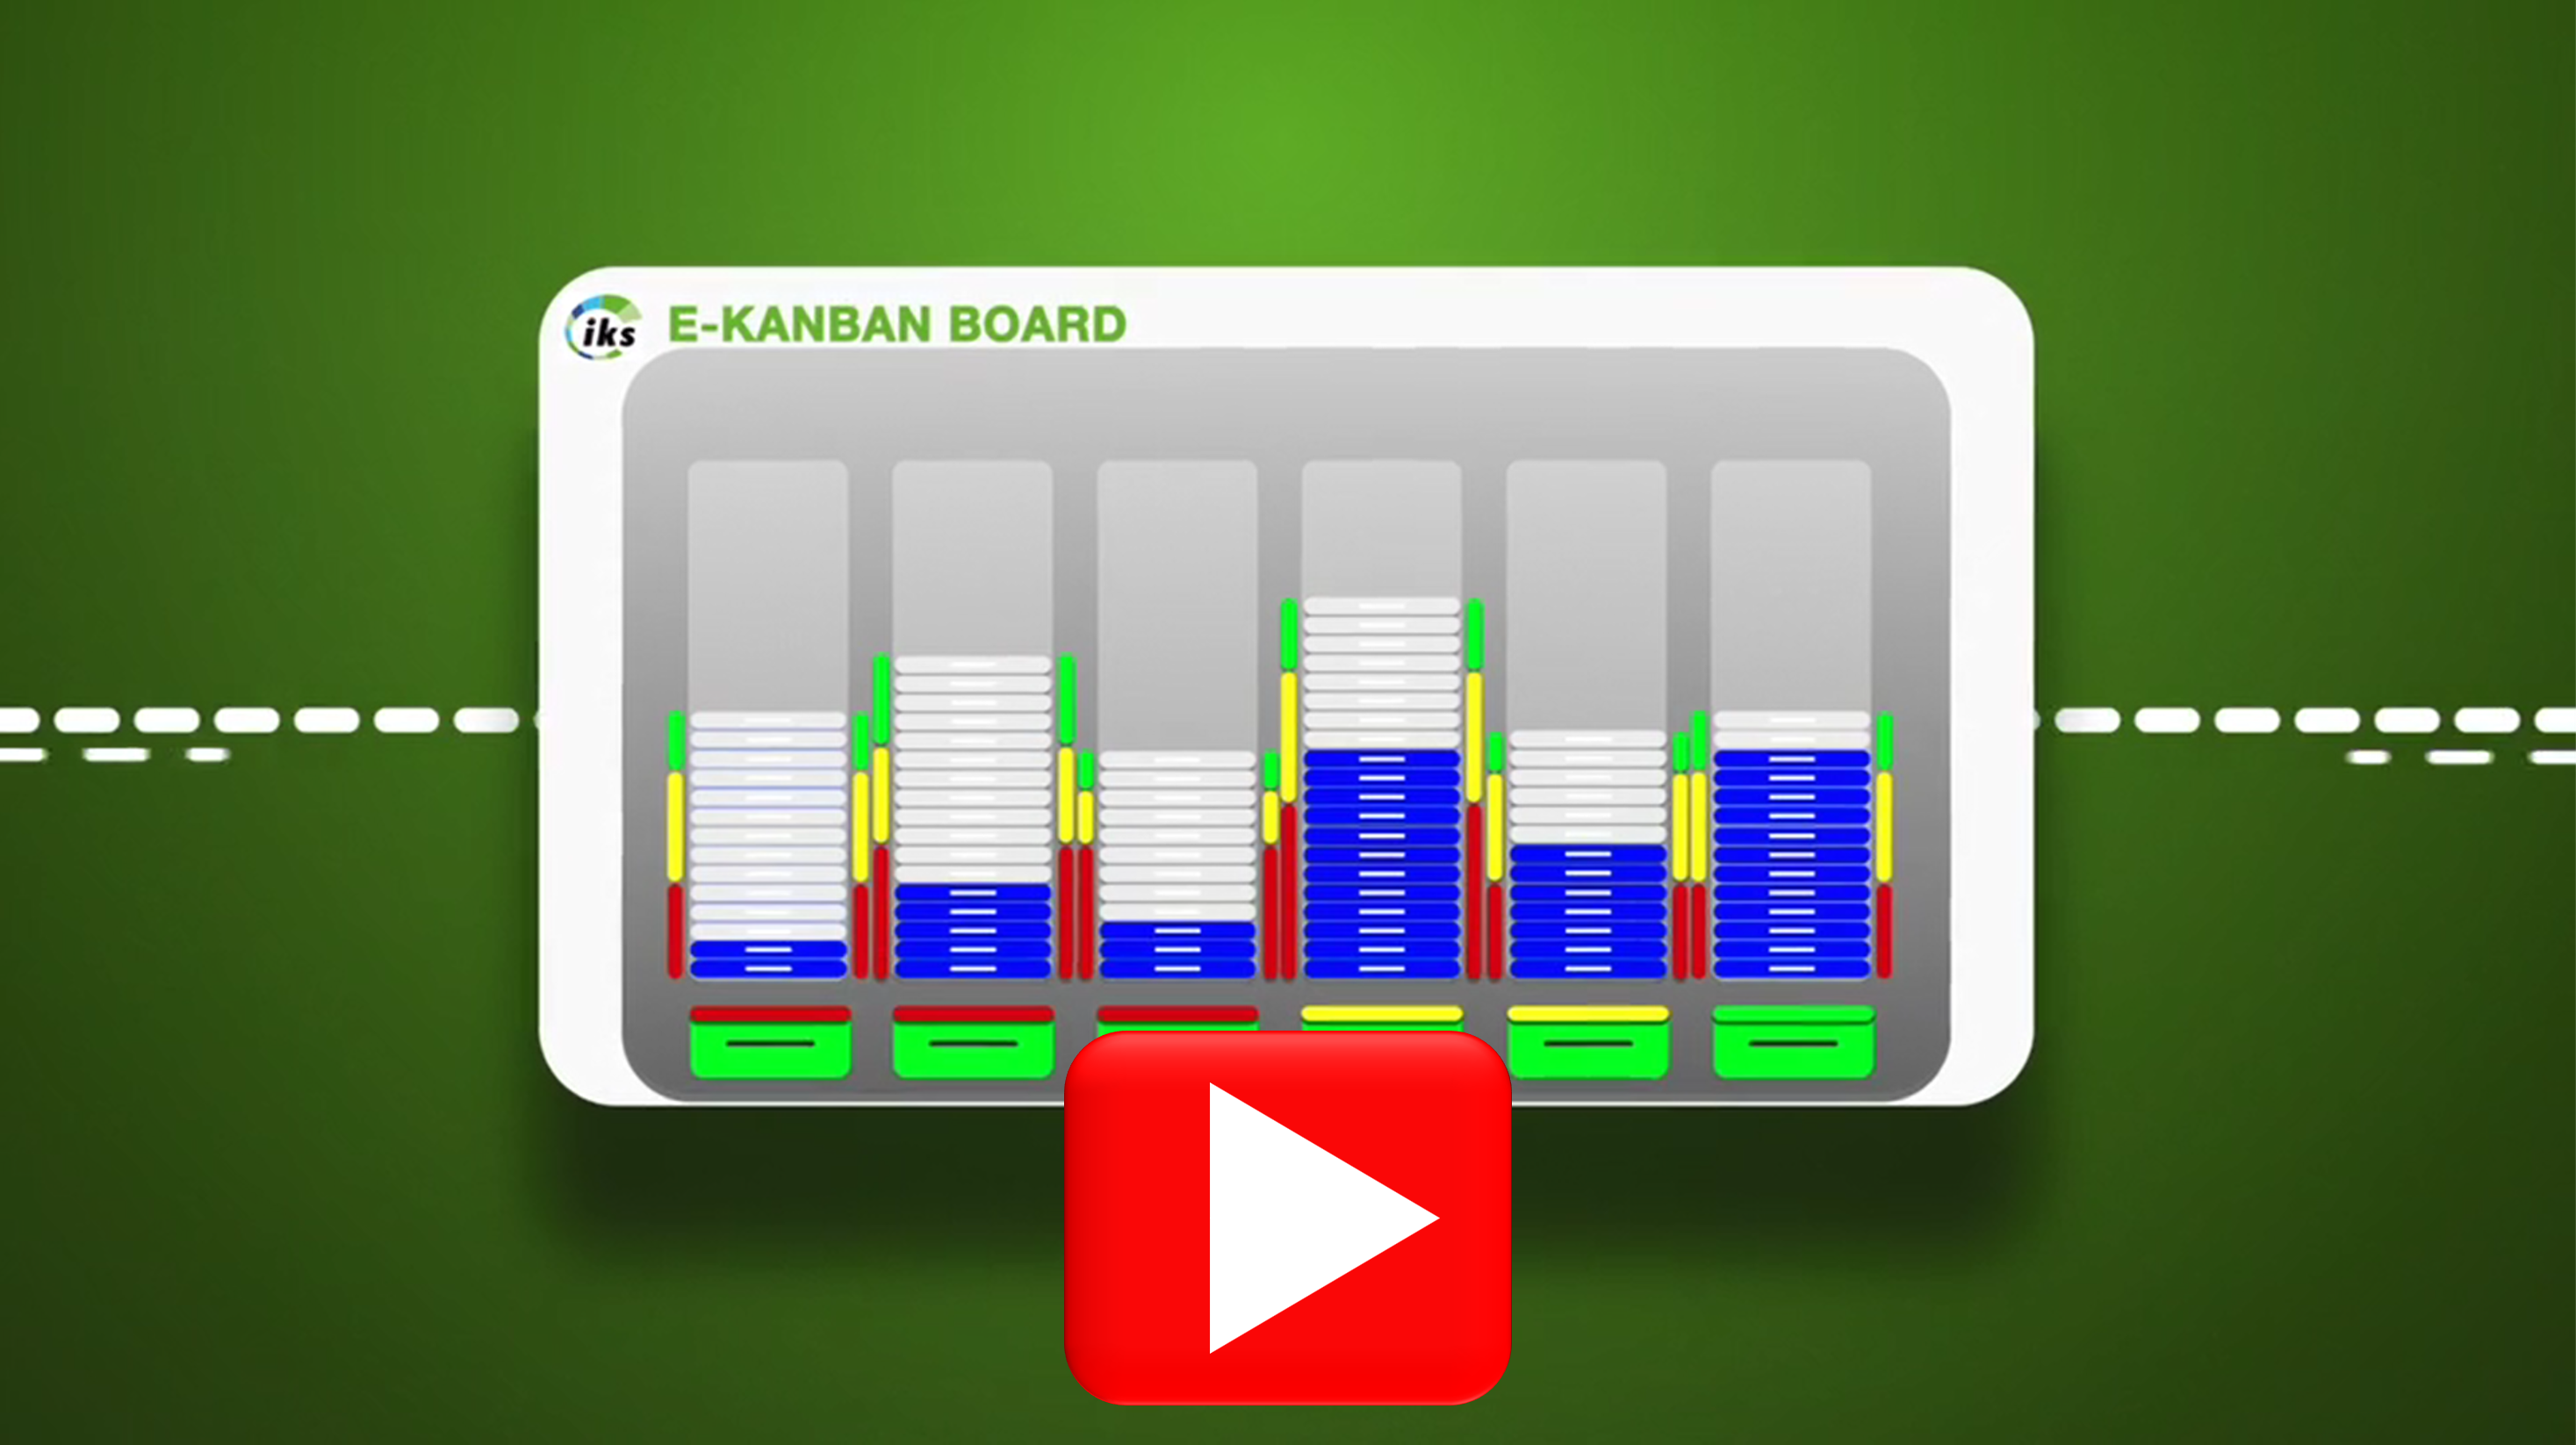 Integrated Kanban System - The web-based E-KANBAN solution for your company